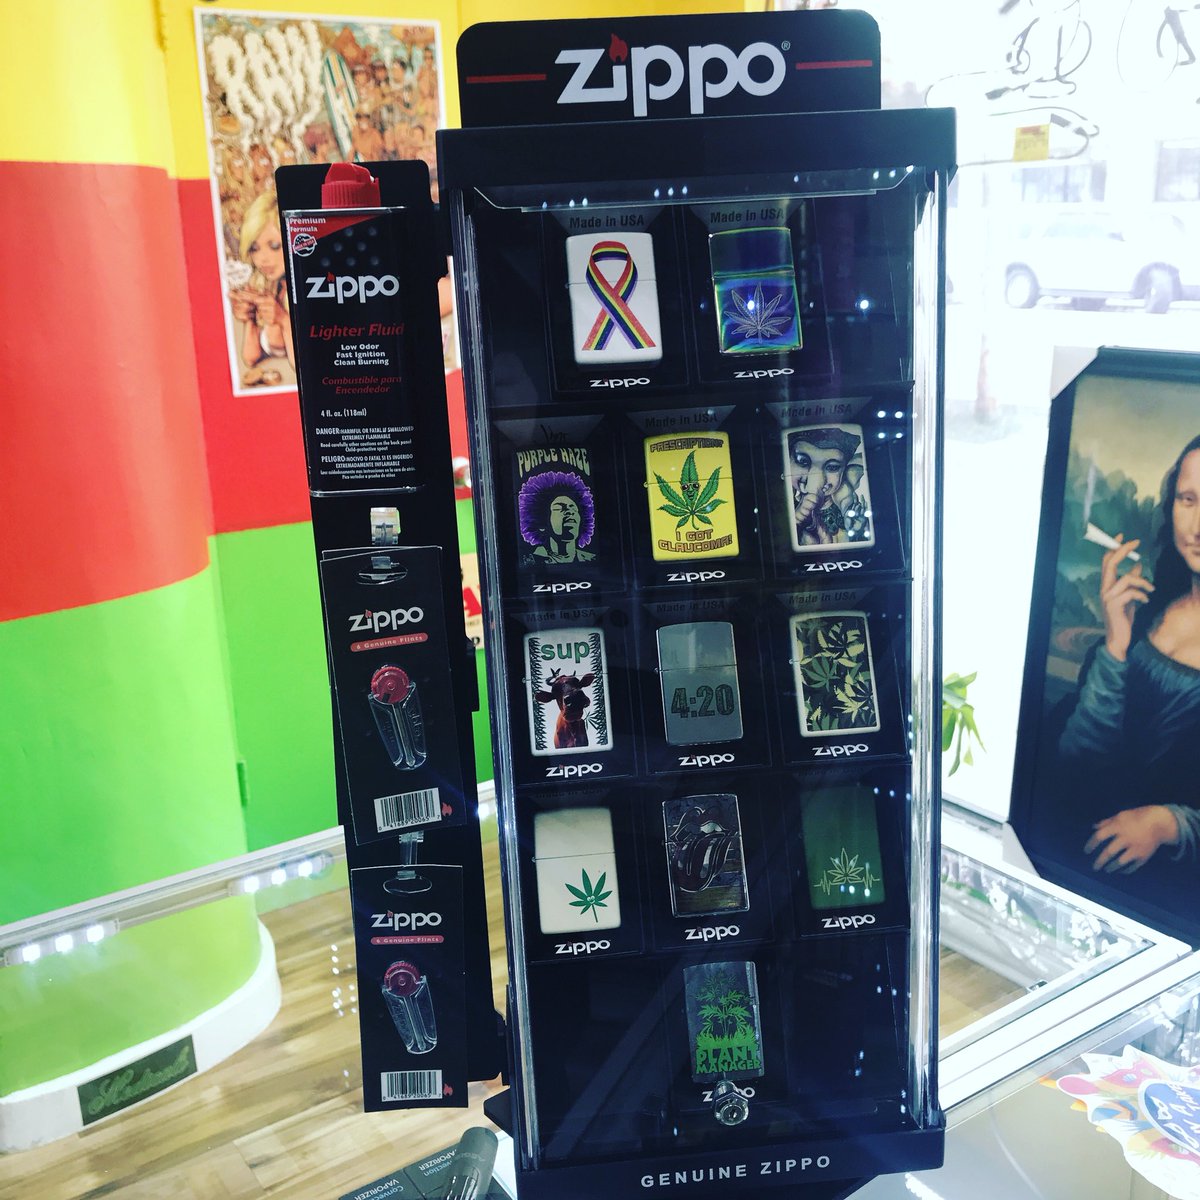 Exclusive and unique zippo lighters are here come check them out and get your own #zippolighter #calle8 #calle8miami #worldofsmokenvapecalle8 #smokingaccessories #waterpipes #bestsmokingselection #bubblers #bestsmokingbrands #chilling #ilovesmoke #smoking #smokinggadgets #420